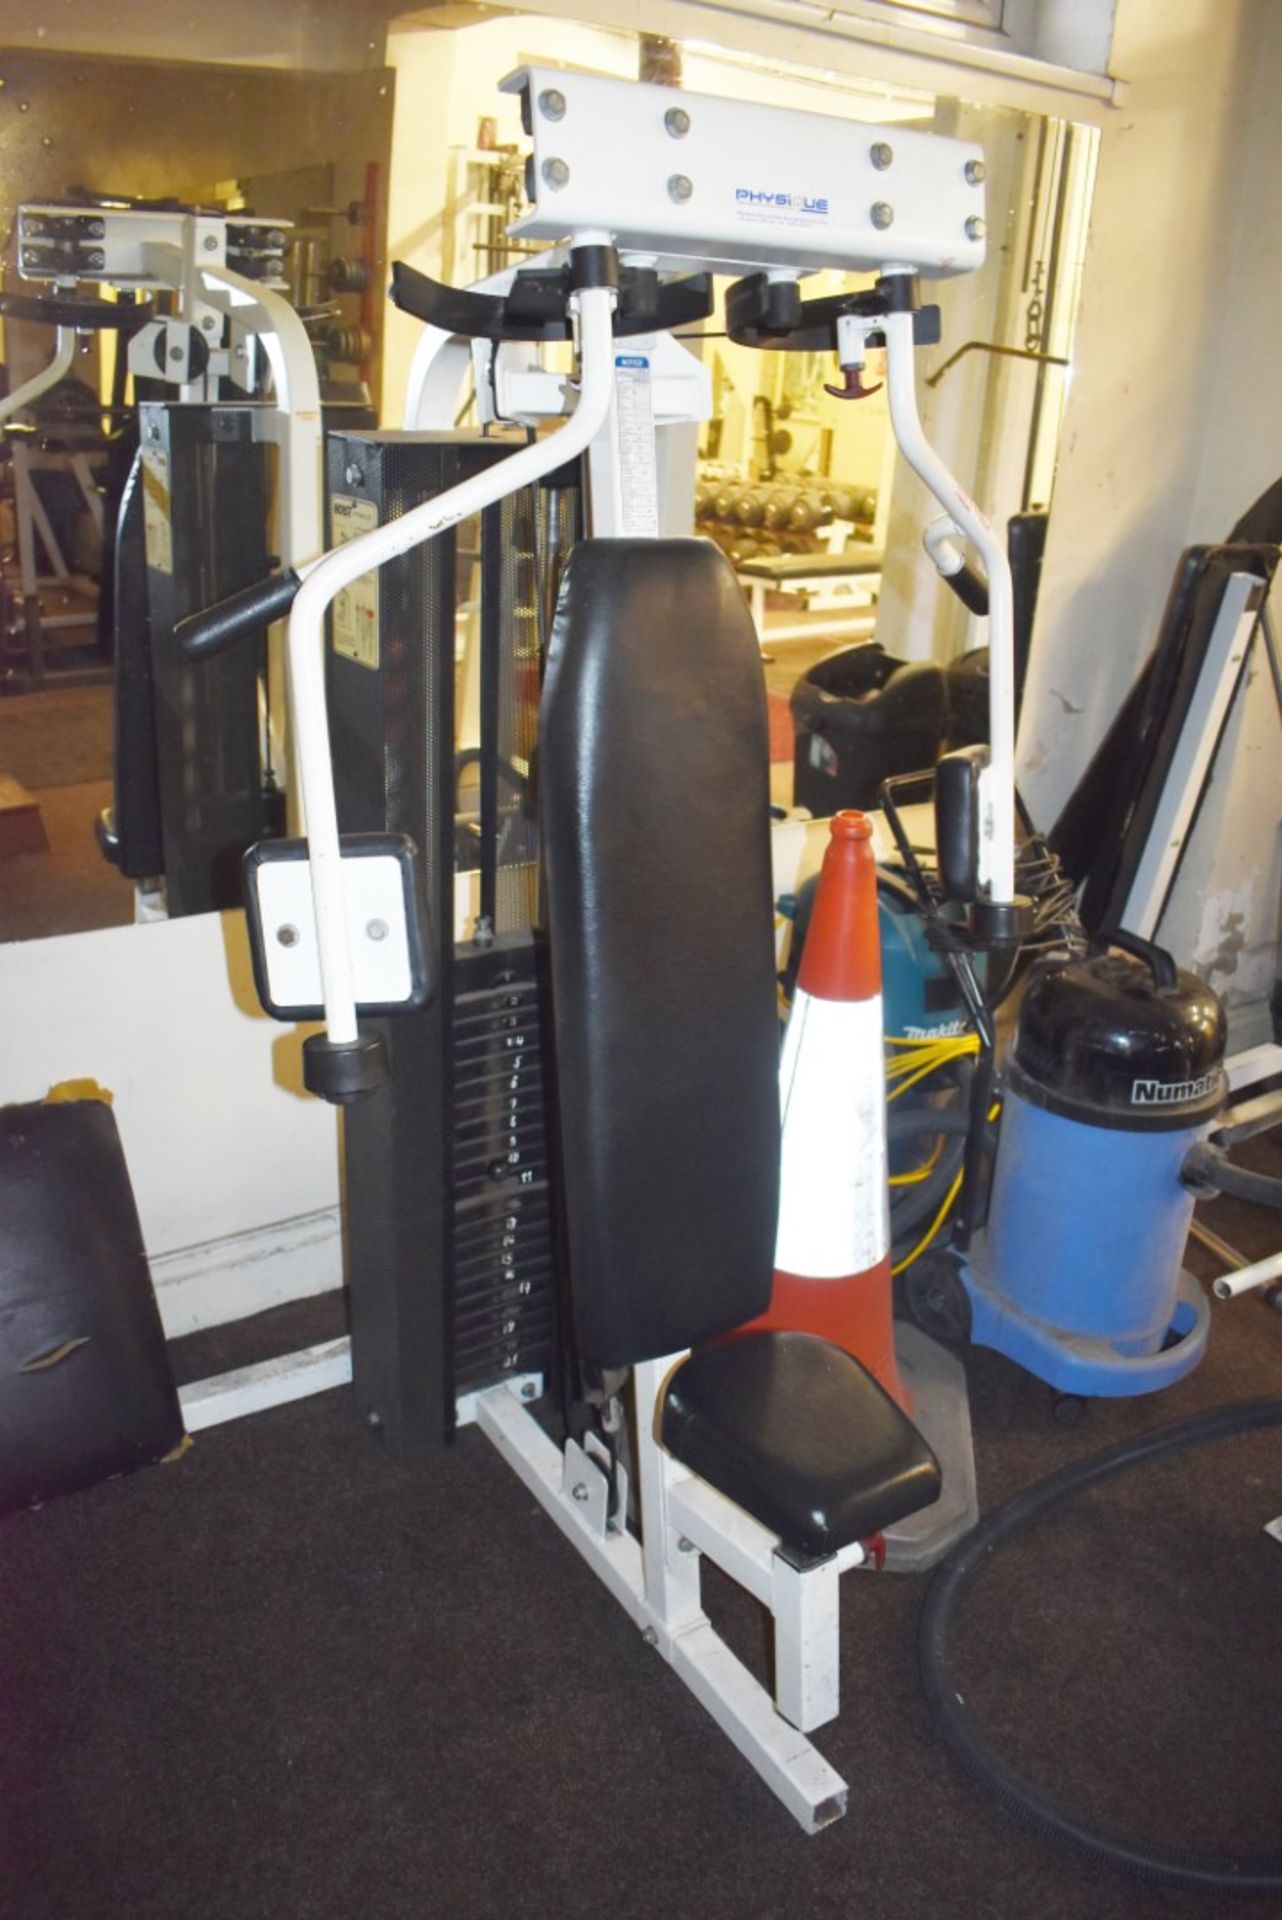 Contents of Bodybuilding and Strongman Gym - Includes Approx 30 Pieces of Gym Equipment, Floor Mats, - Image 7 of 95